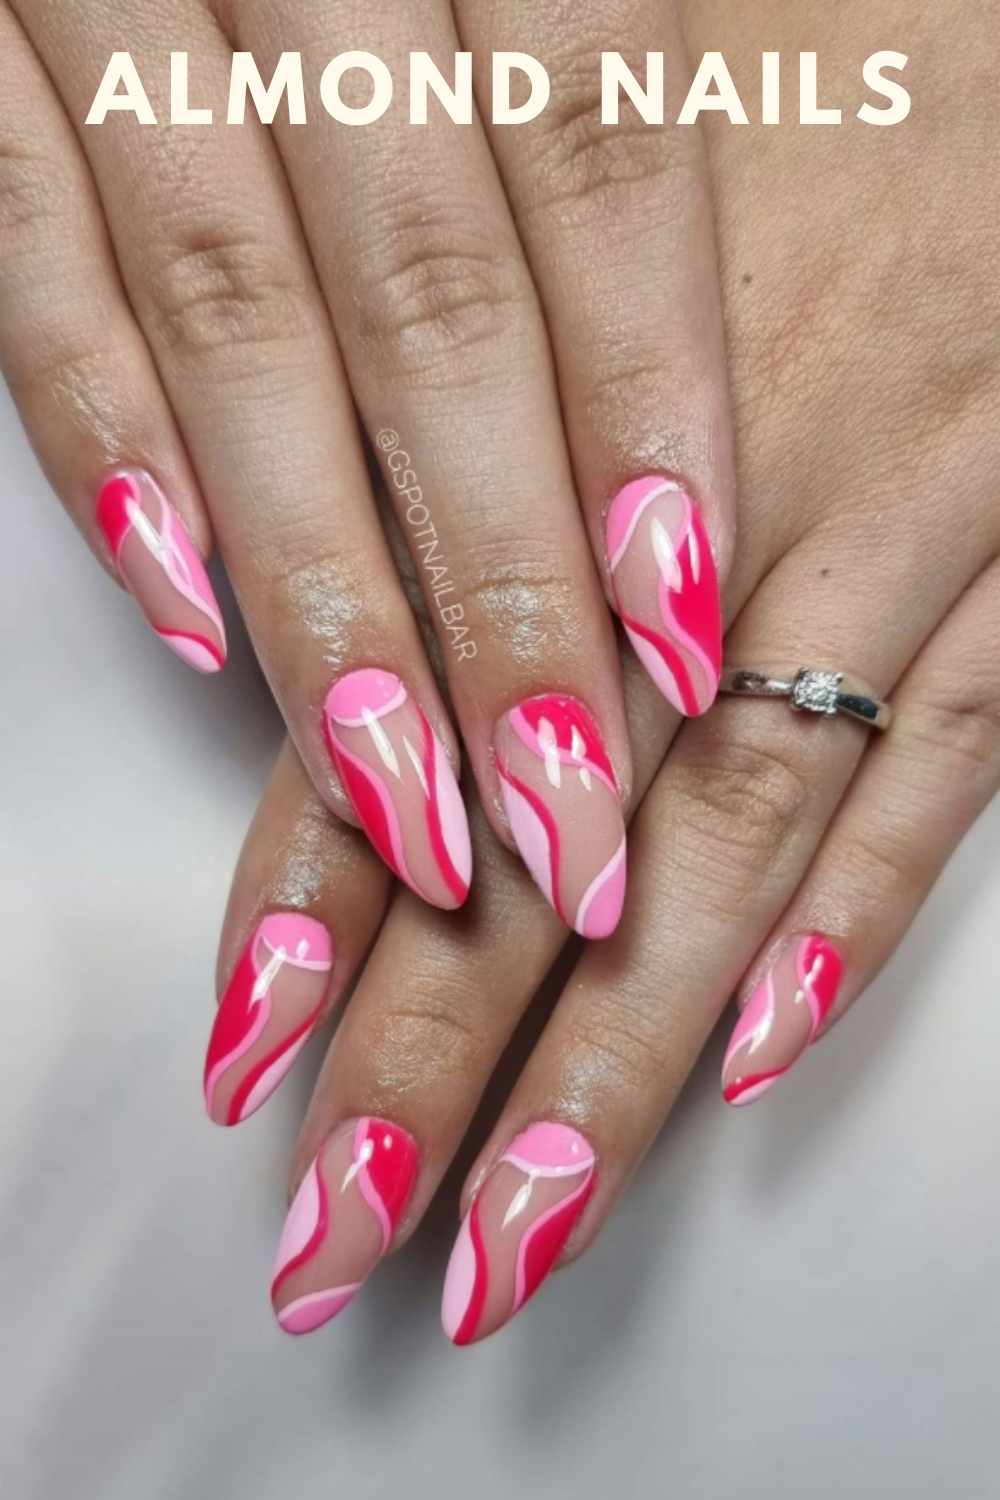 Best Almond Nail Art Design  for Everyone in 2021